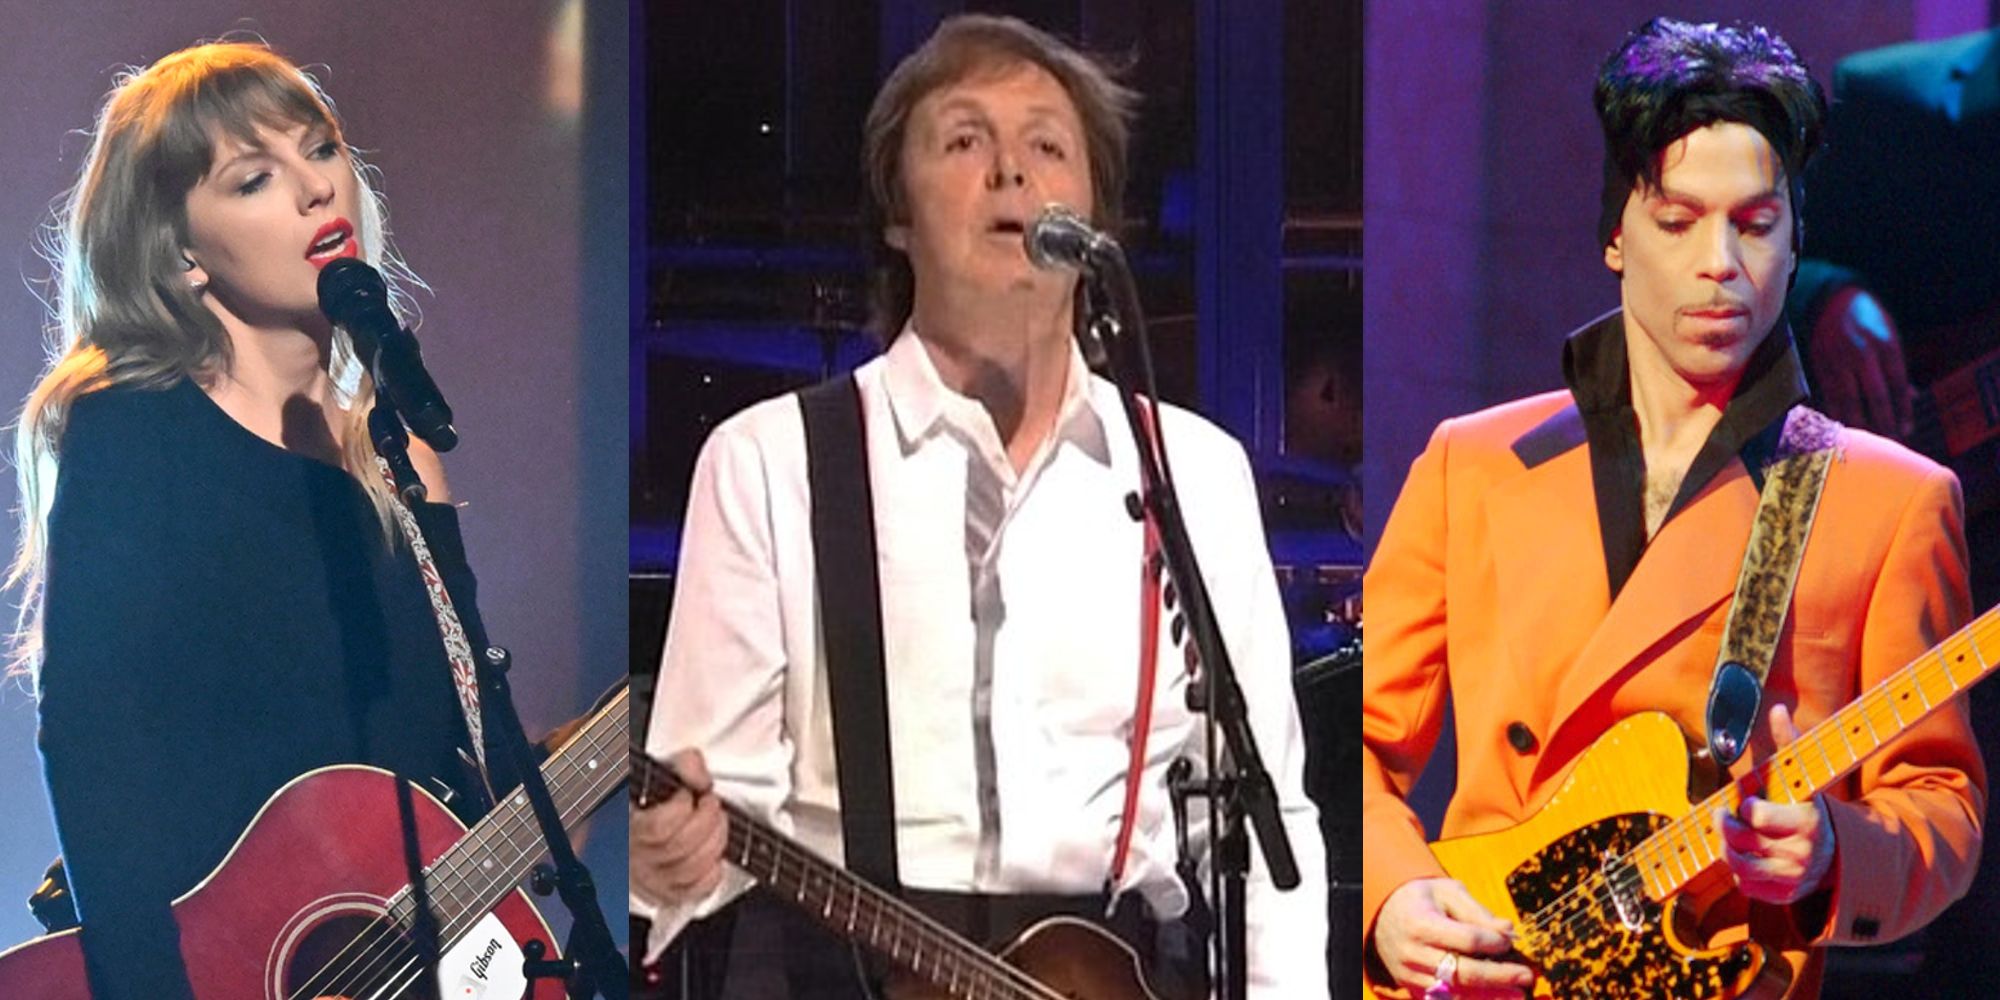 Taylor Swift playing guitar on SNL in 2021; Paul McCartney playing bass on SNL in 2010; Prince playing guitar on SNL in 2006